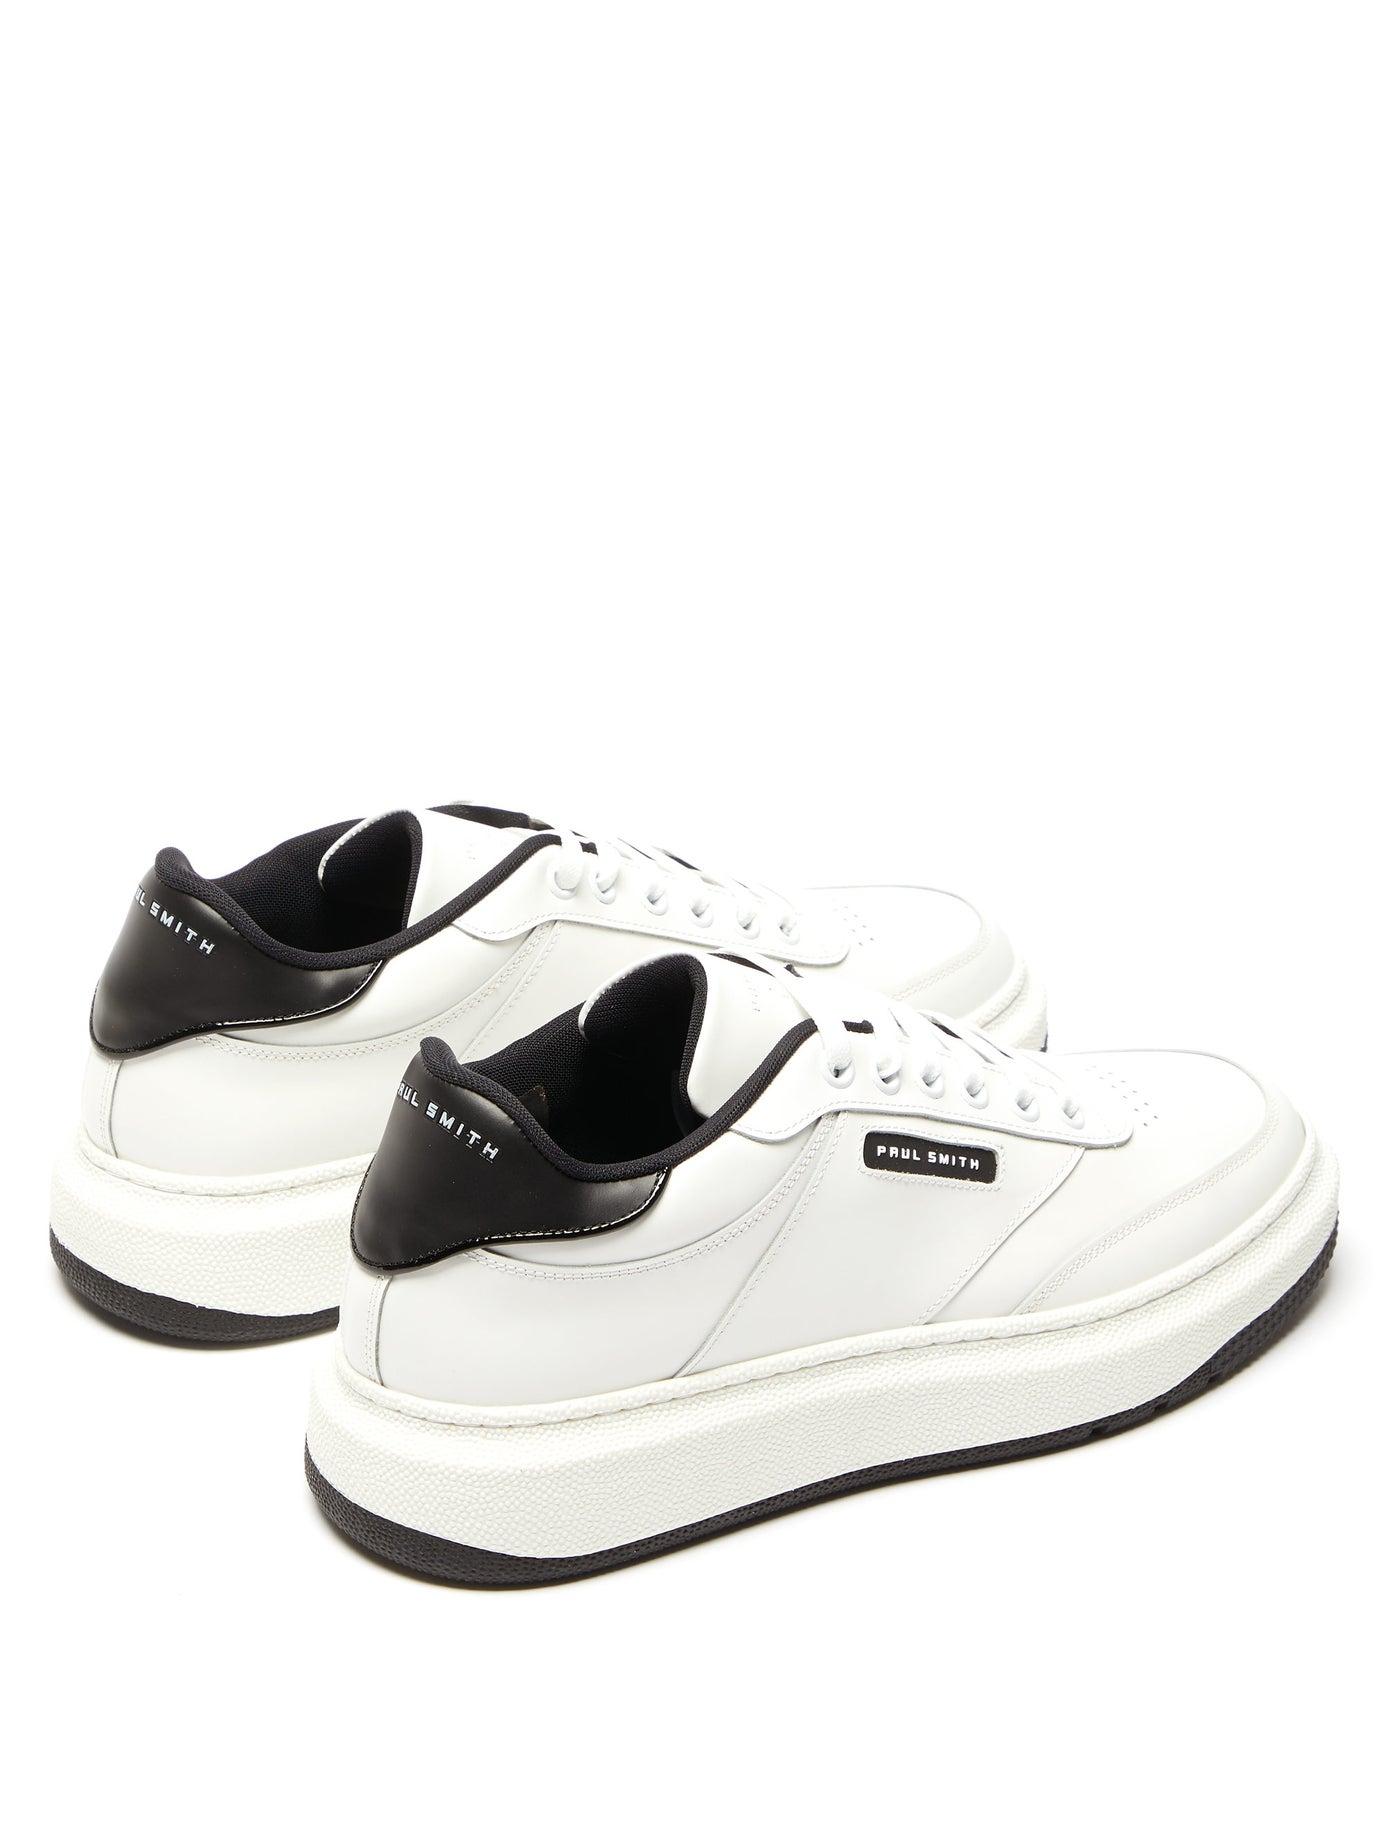 Paul Smith Hackney Leather Trainers in White for Men - Lyst